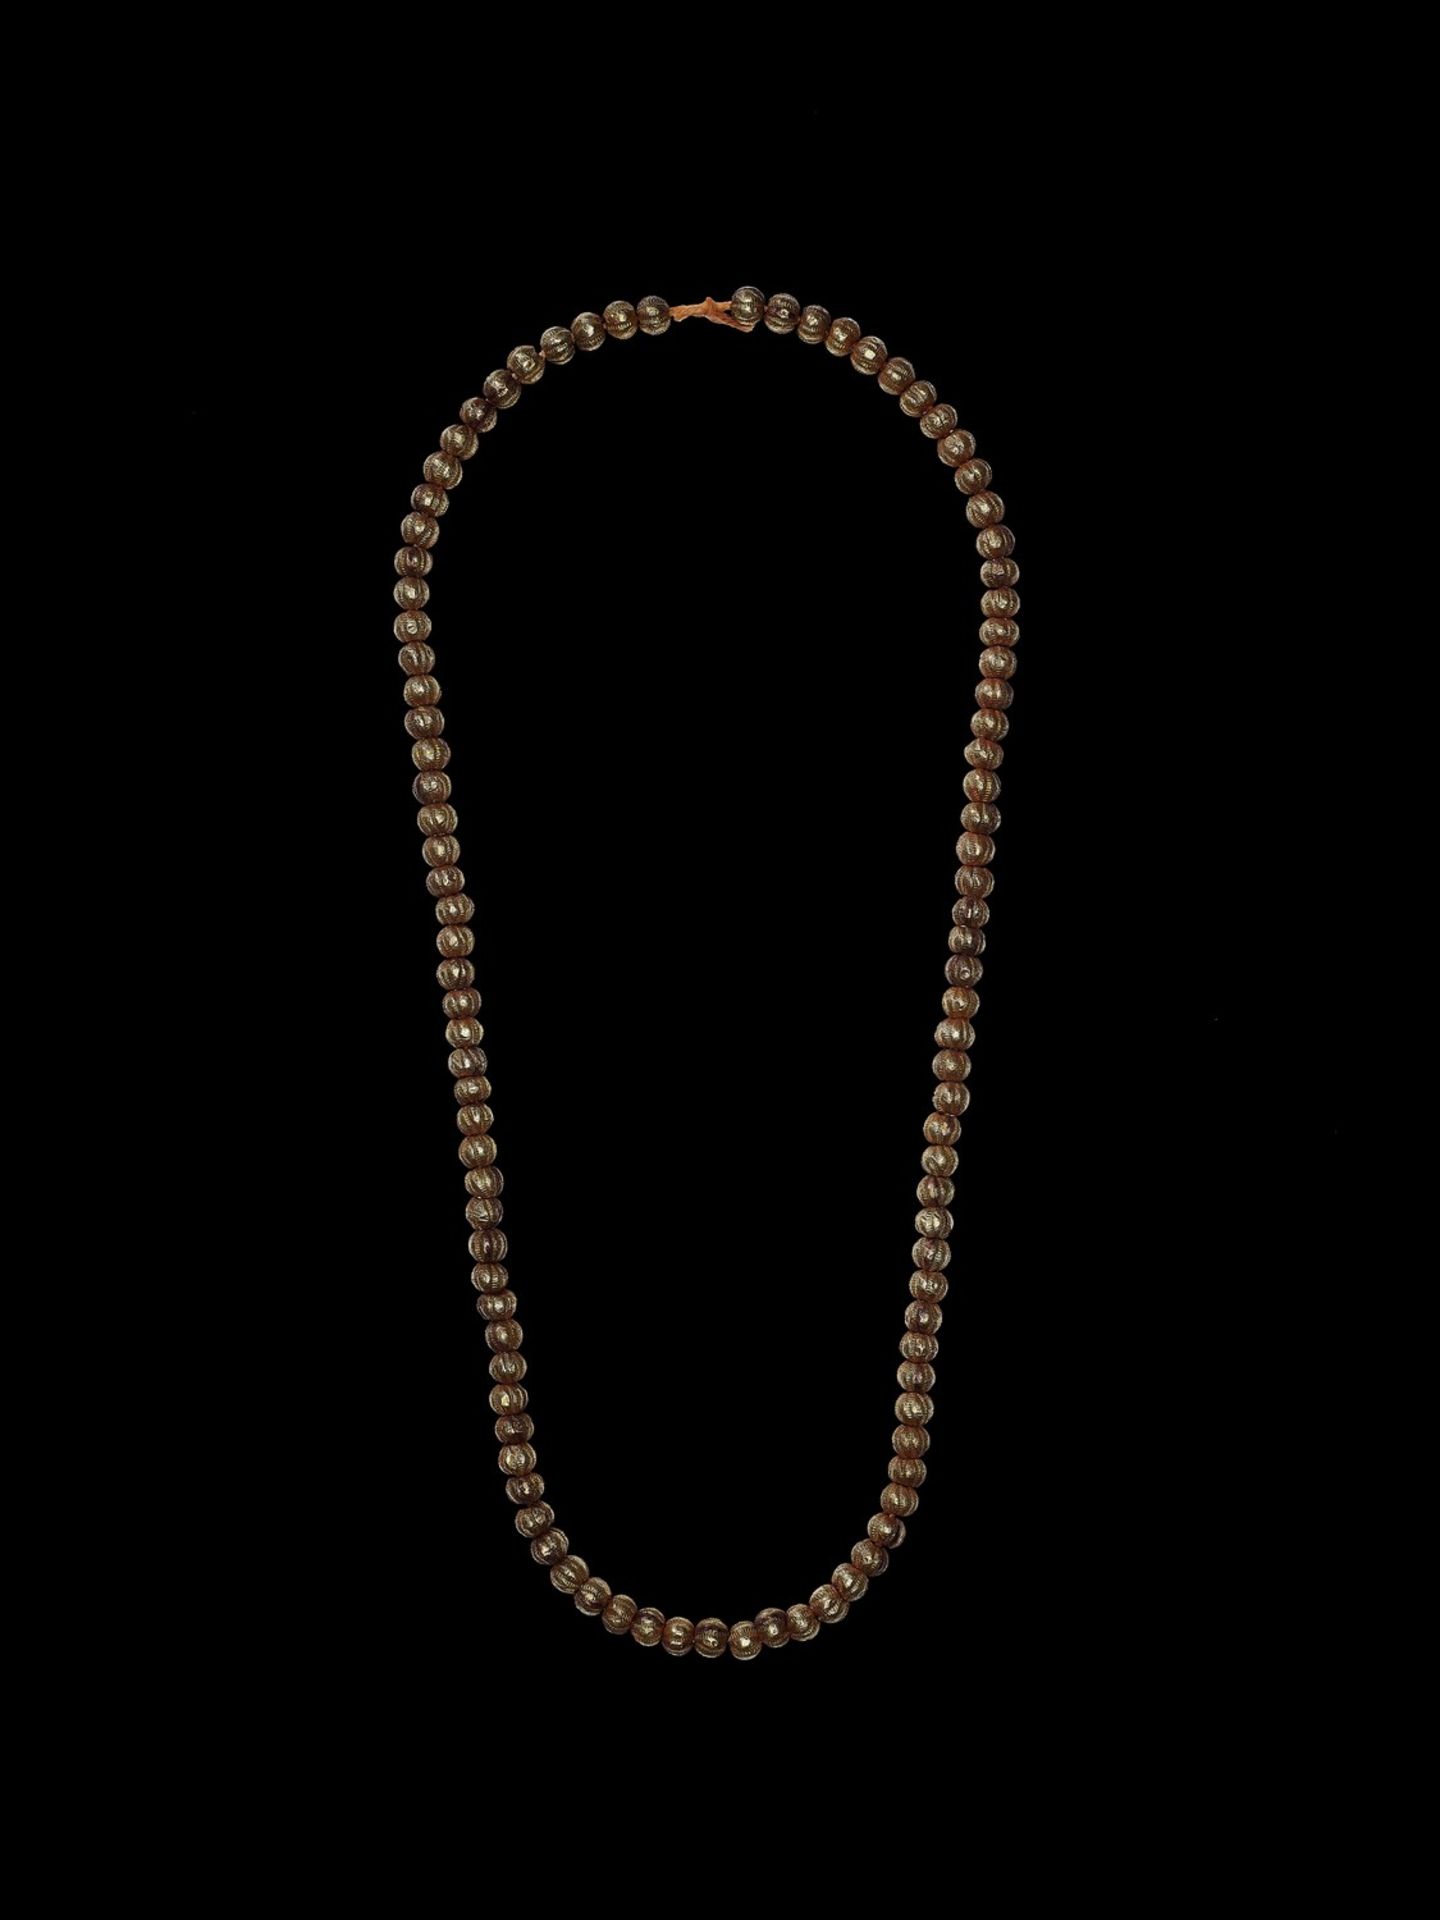 A BURMESE NECKLACE WITH 100 GILT DRY LACQUER BEADS